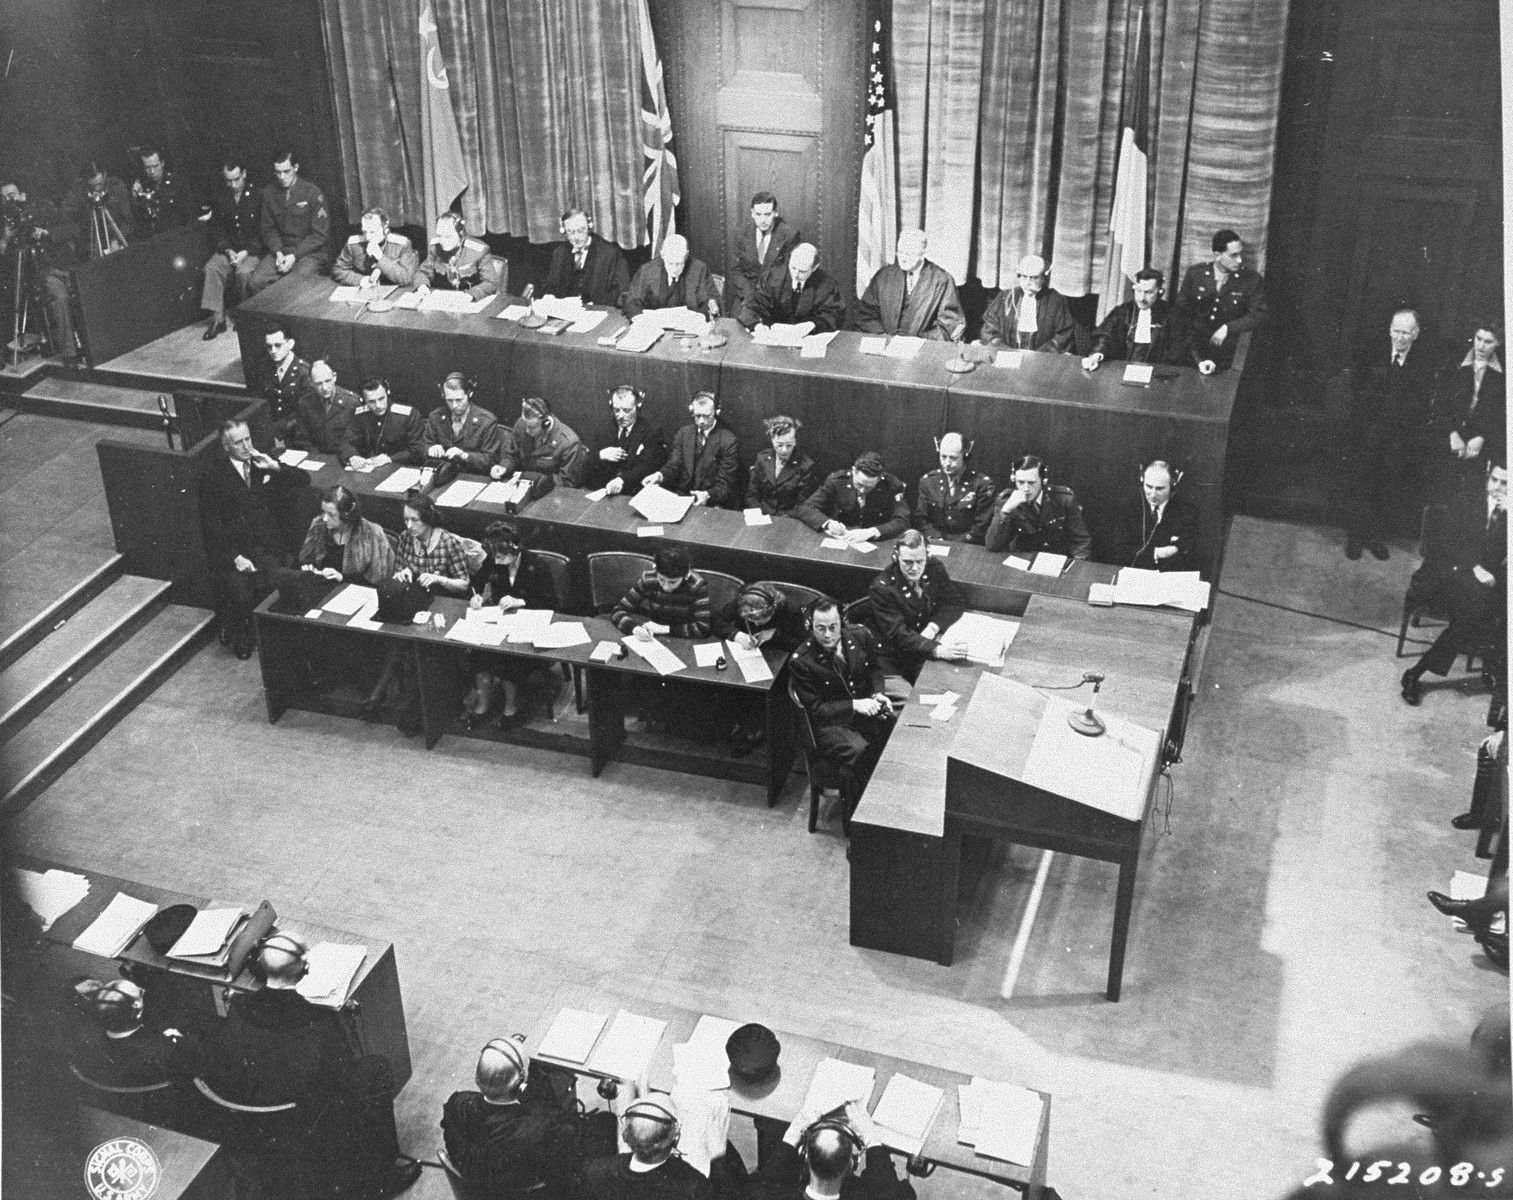 View of the judges' bench at the opening session of the International Military Tribunal trial of war criminals at Nuremberg.